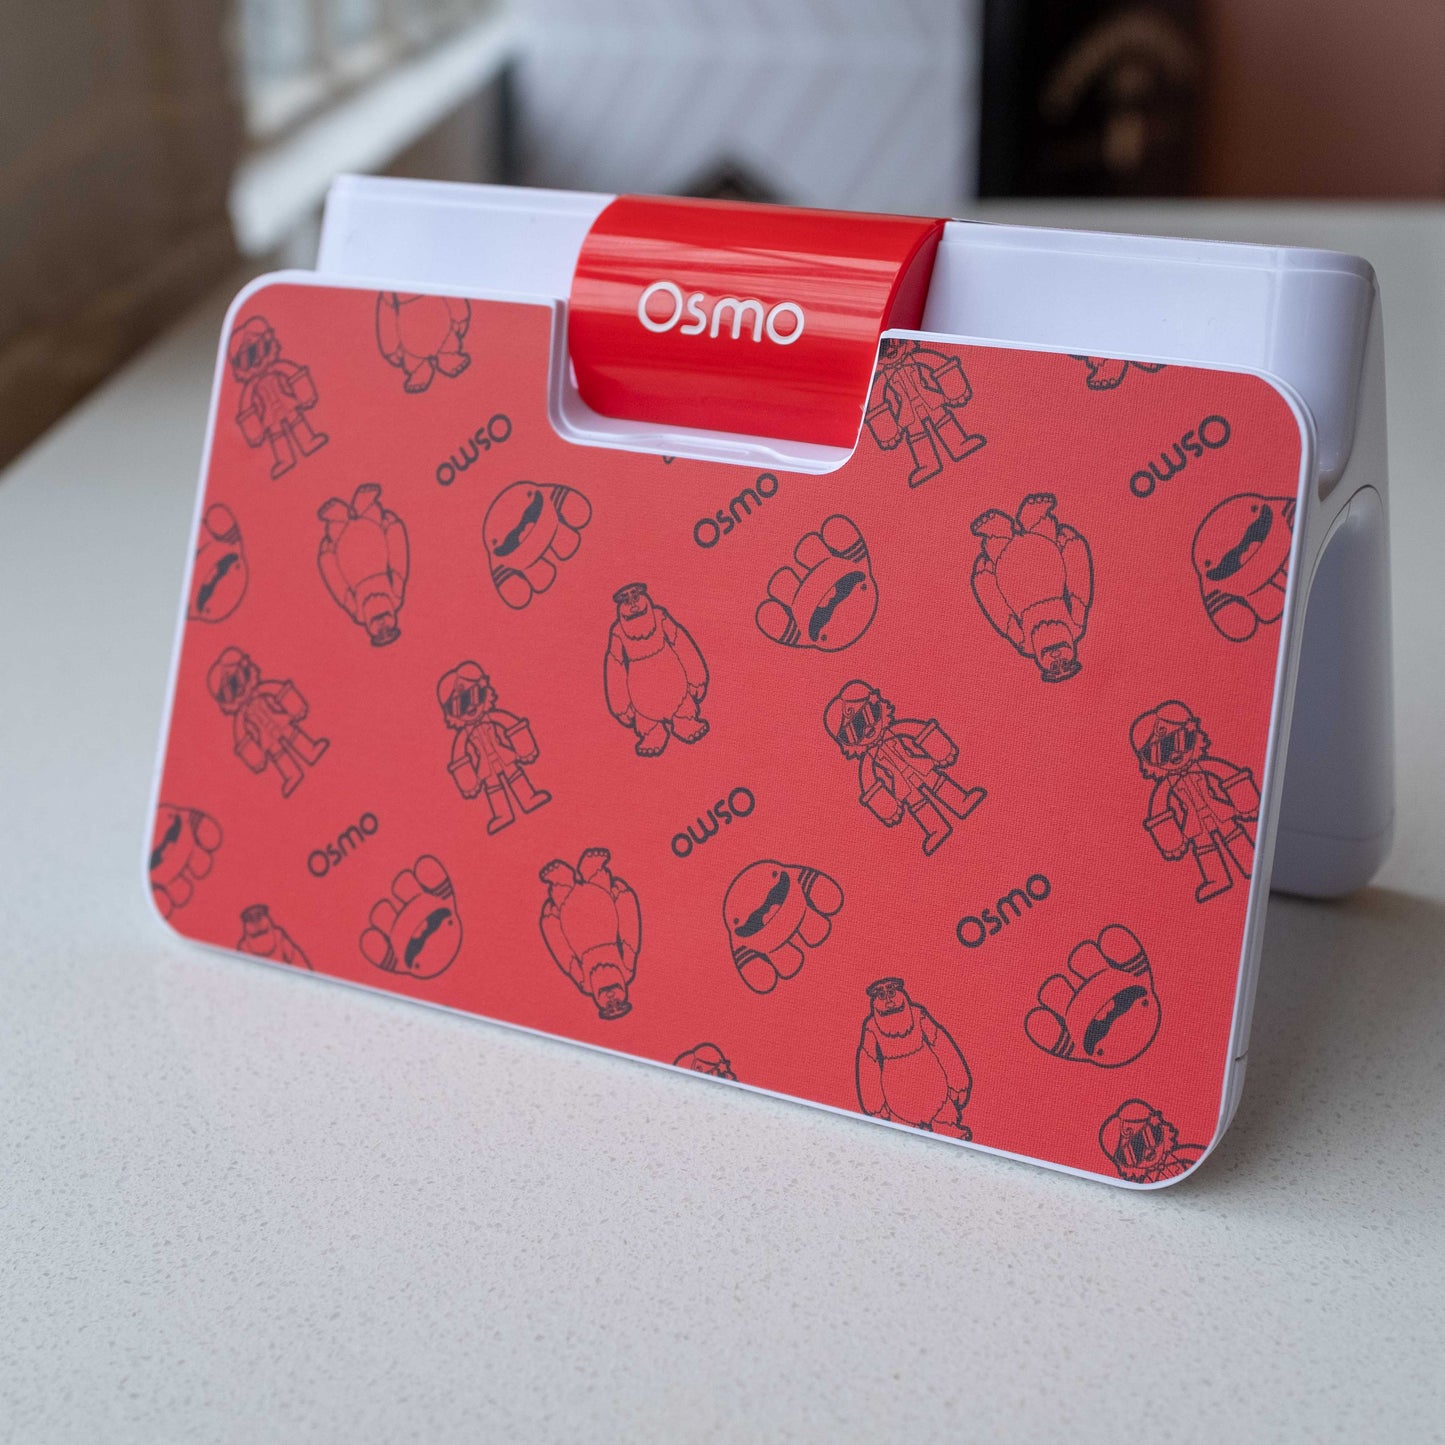 Osmo Hero - Red - For Fire Base